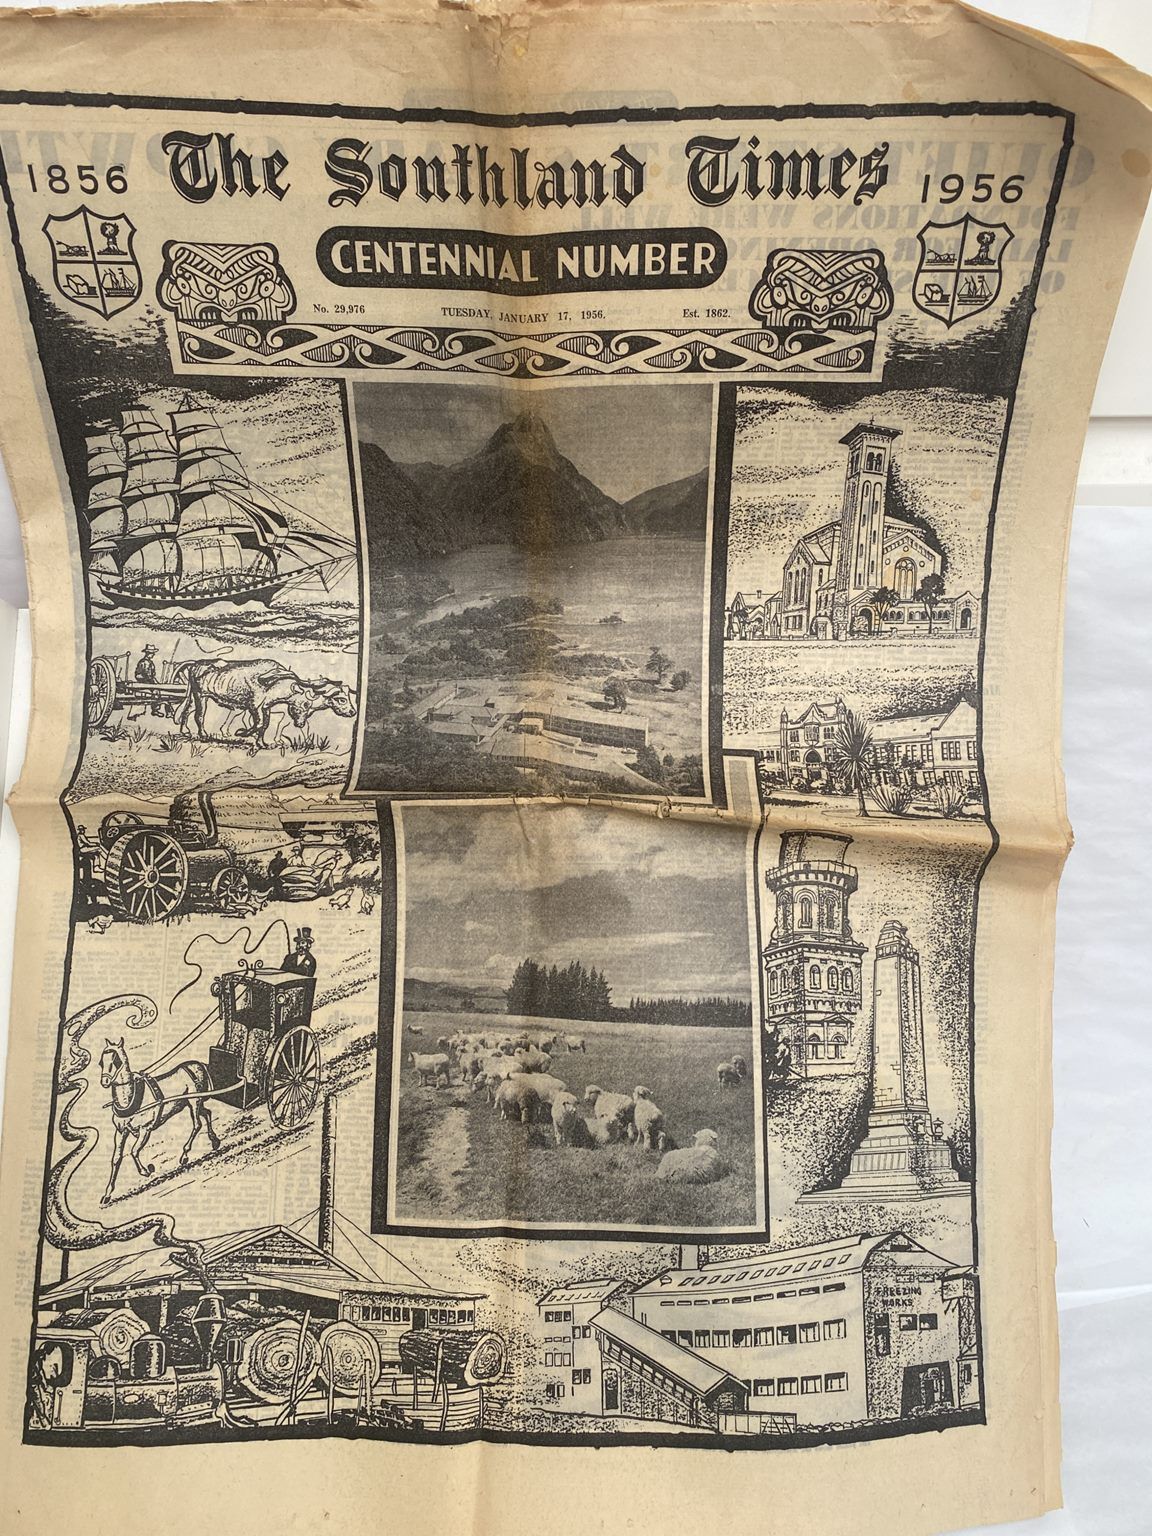 OLD NEWSPAPER: The Southland Times 1856-1956 Centennial edition